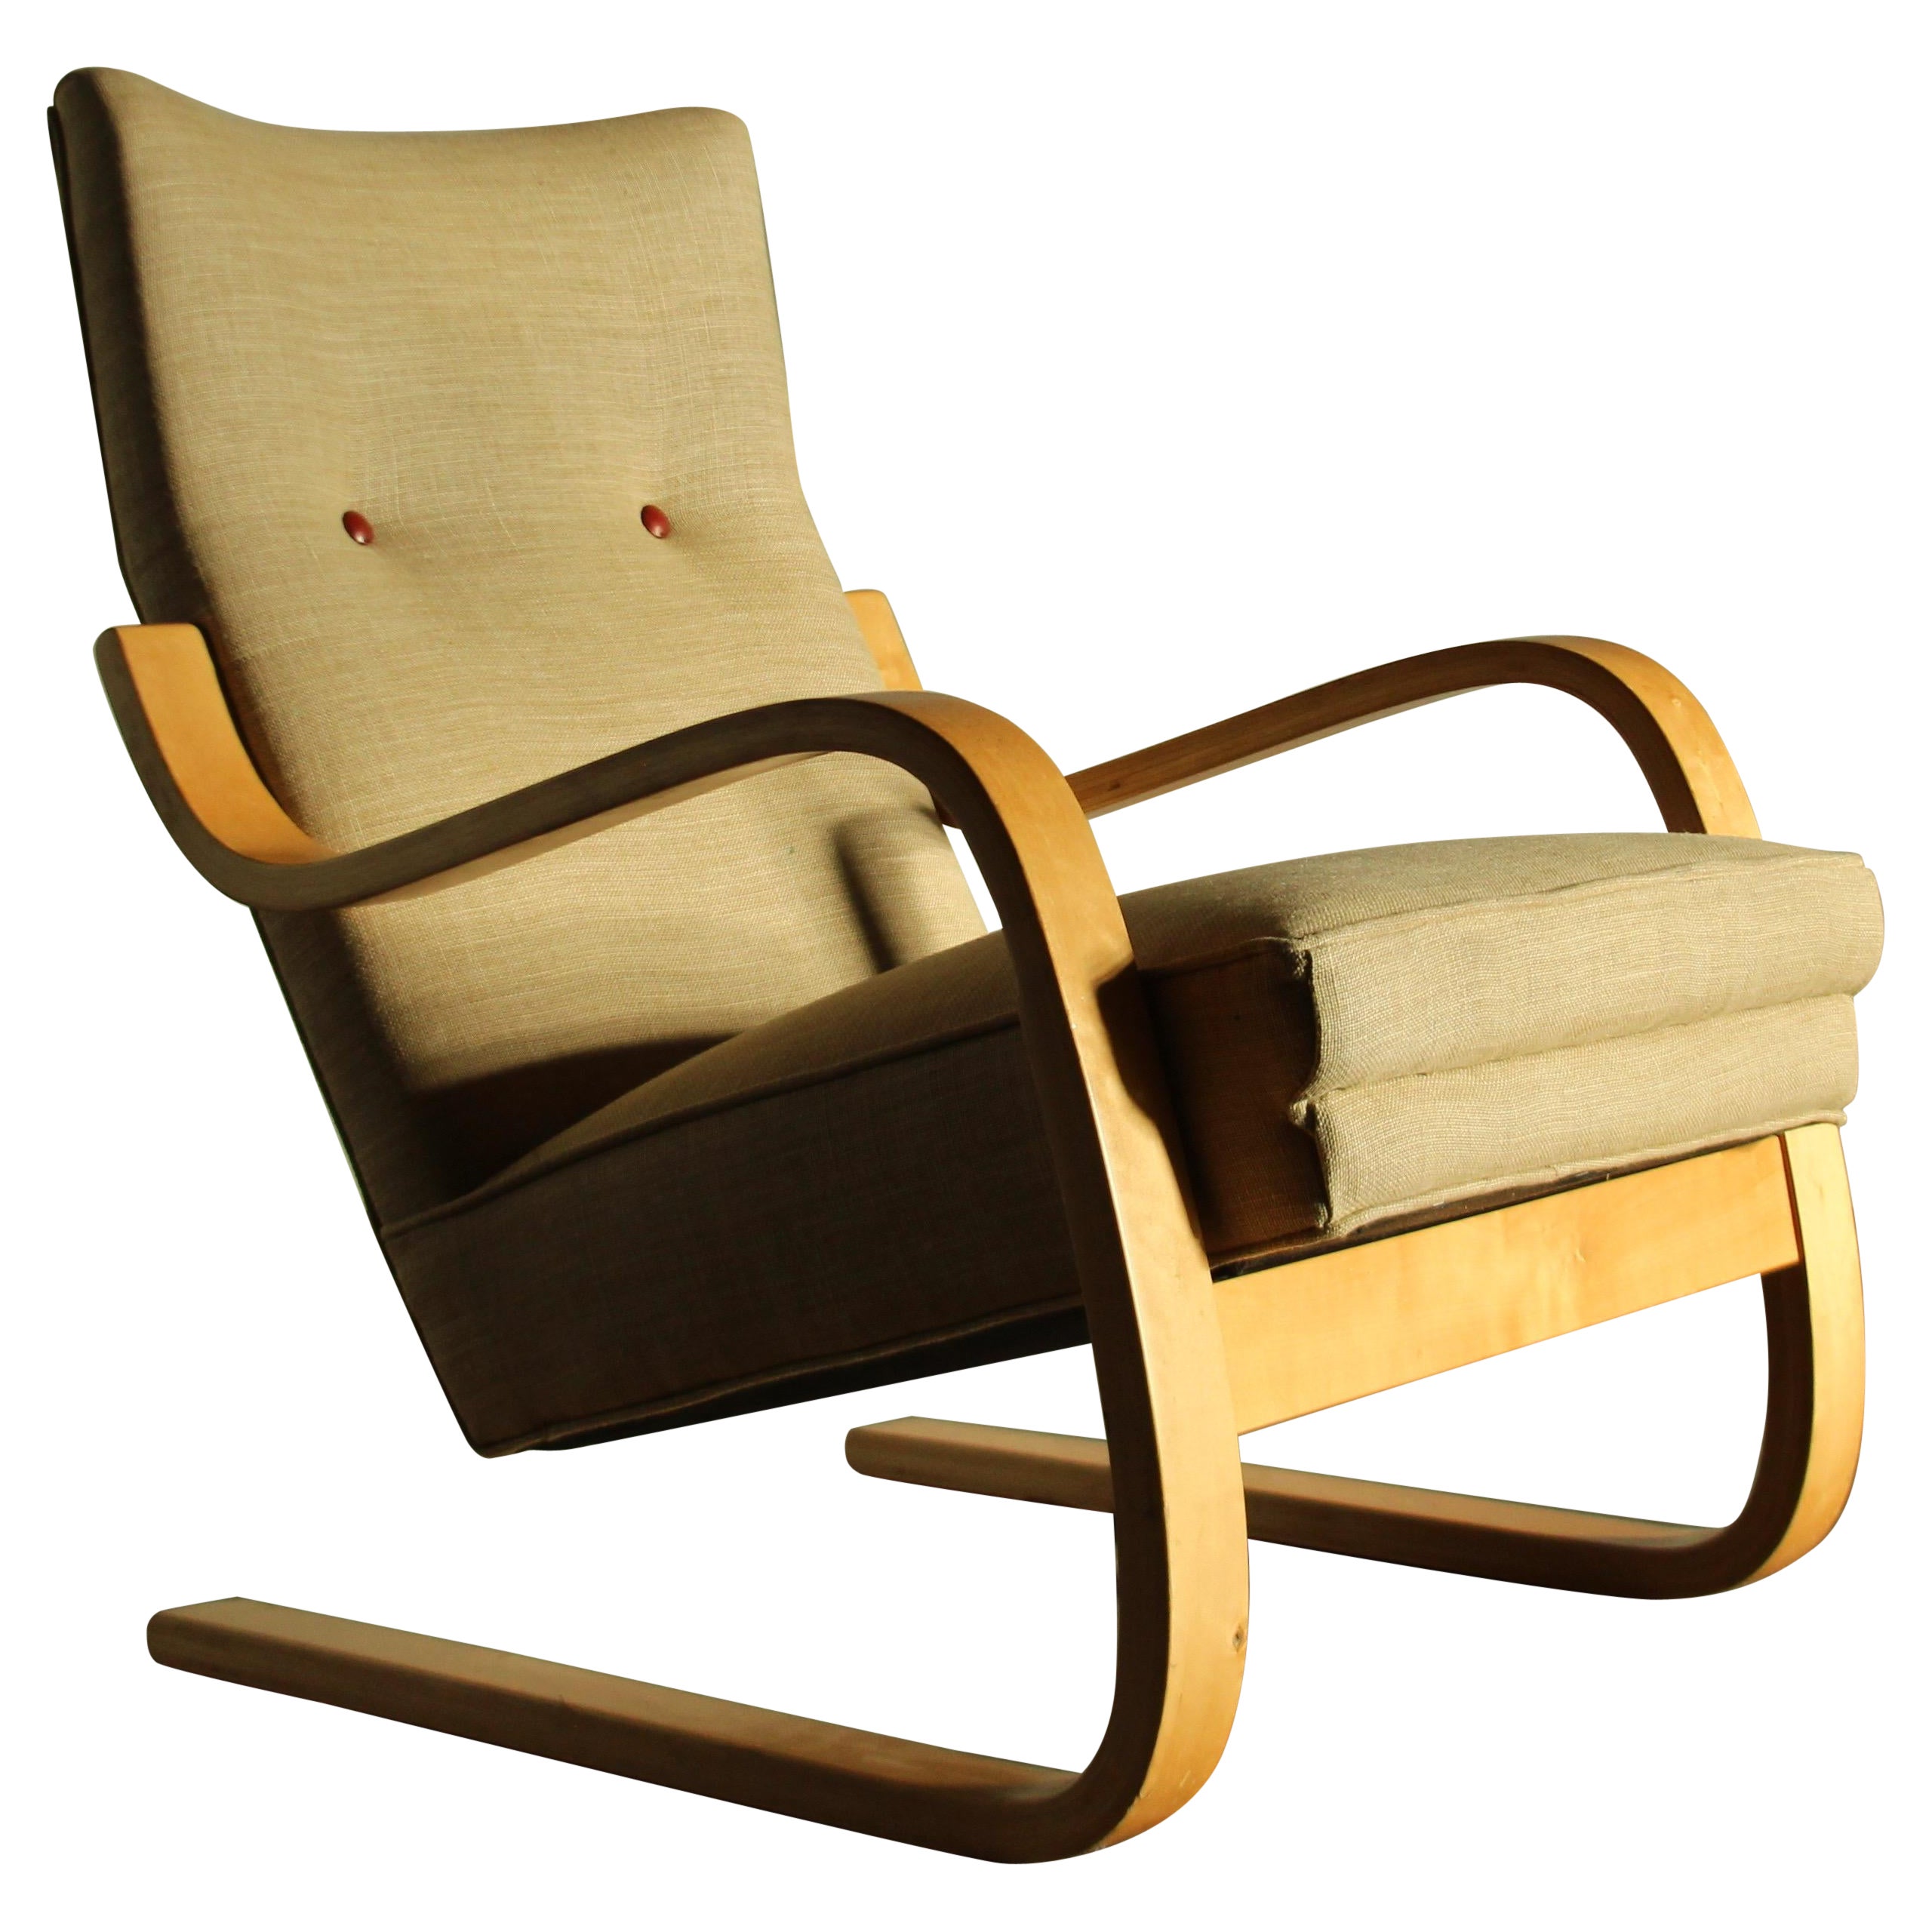 Alvar Aalto Early Model 401 Bentwood Lounge Chair, 1940s For Sale